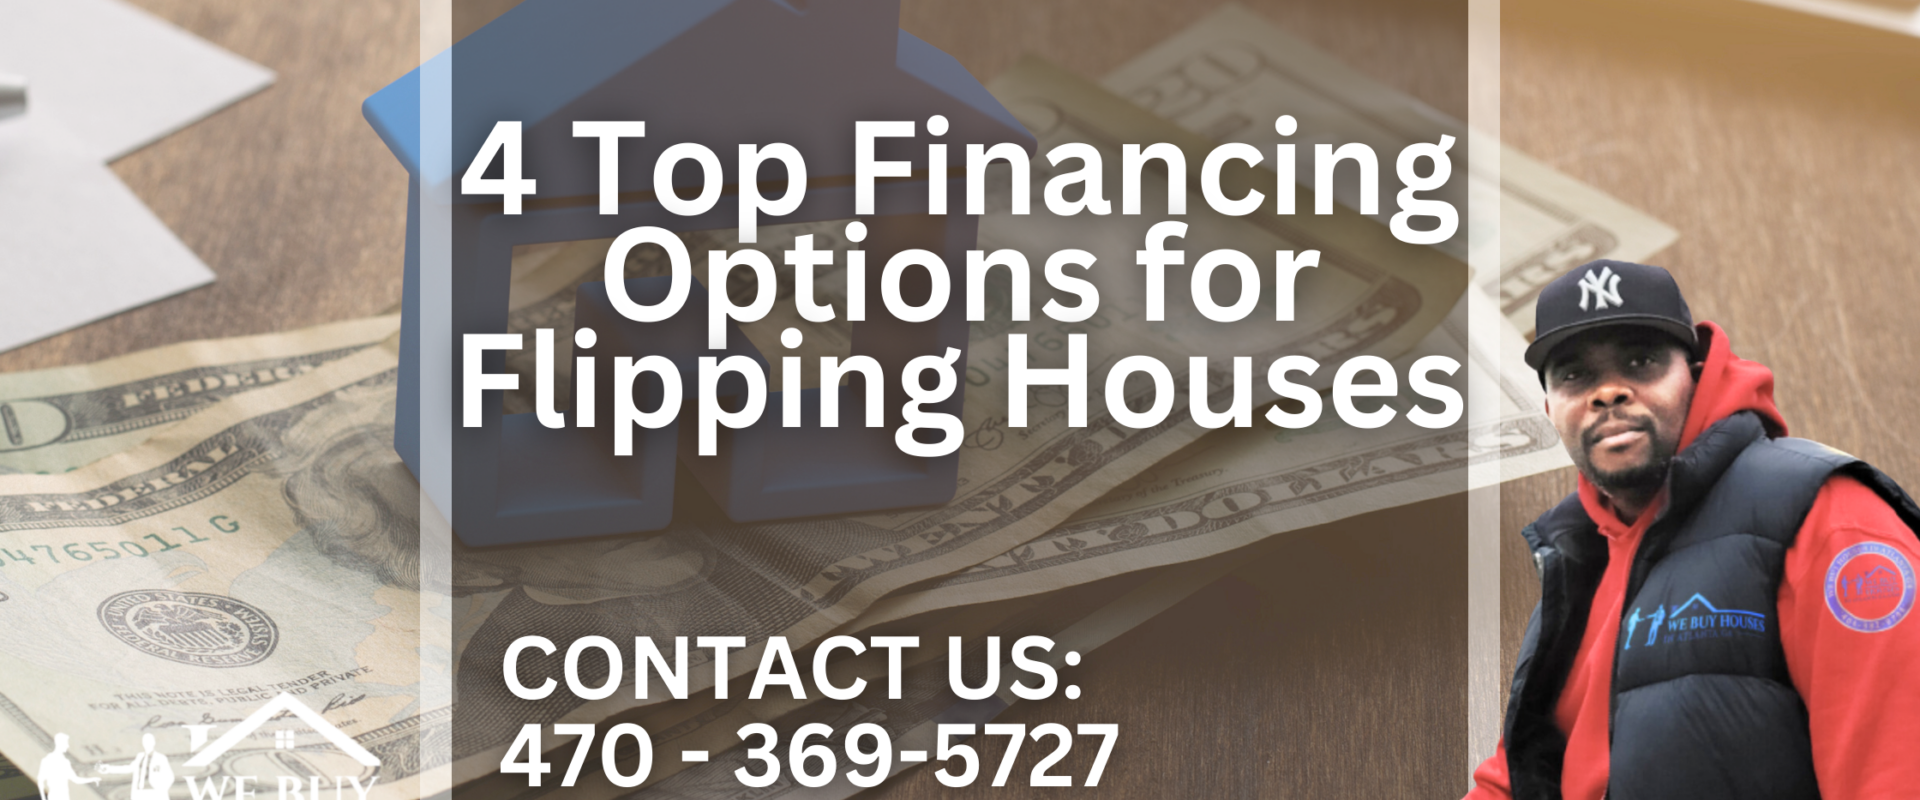 4 Top Financing Options for Flipping Houses